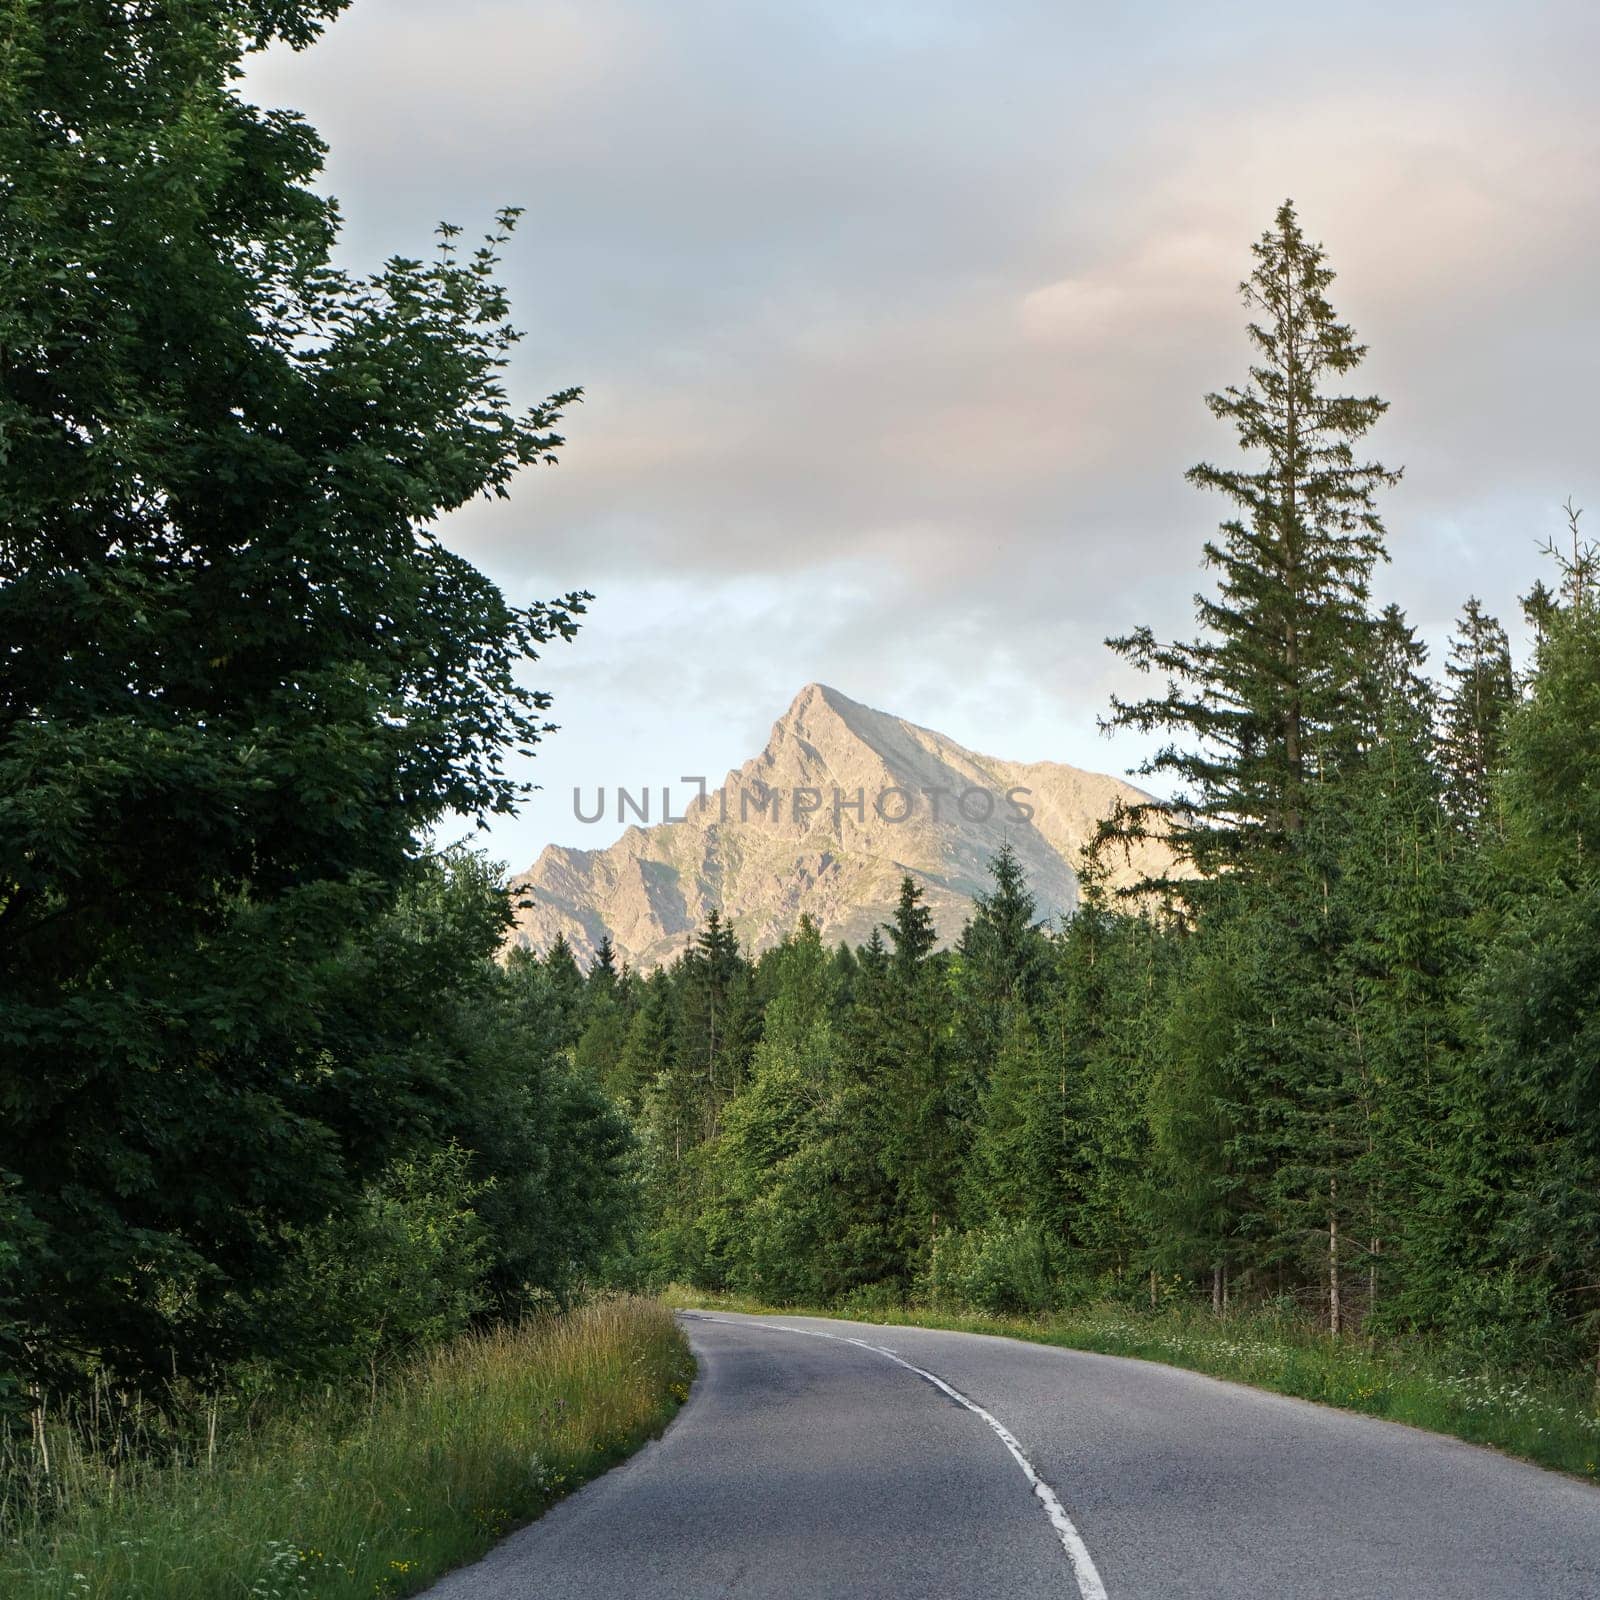 Forest asphalt road curve, coniferous trees and grass on both sides, mount Krivan peak (symbol of Slovakia) with sunset sky above in distance